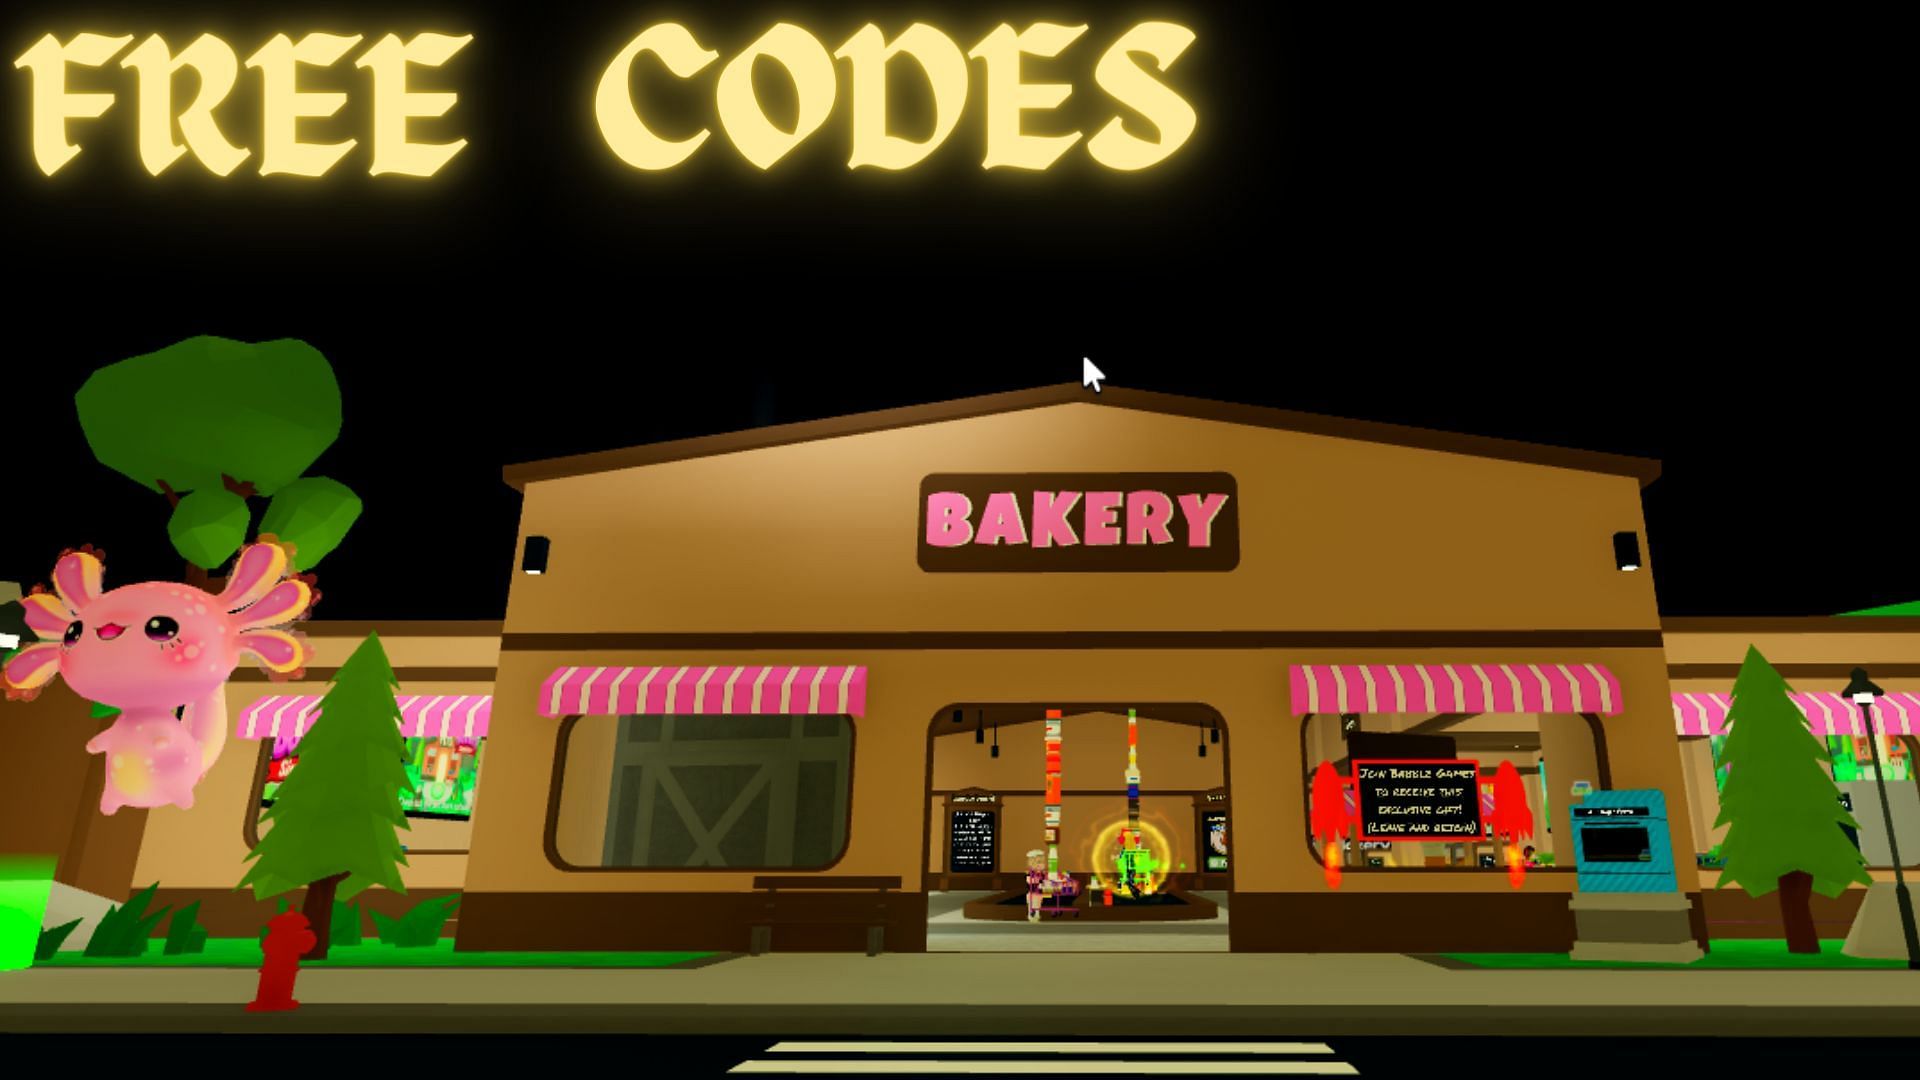 Free Active codes in Bakery Simulator (Image via Roblox)